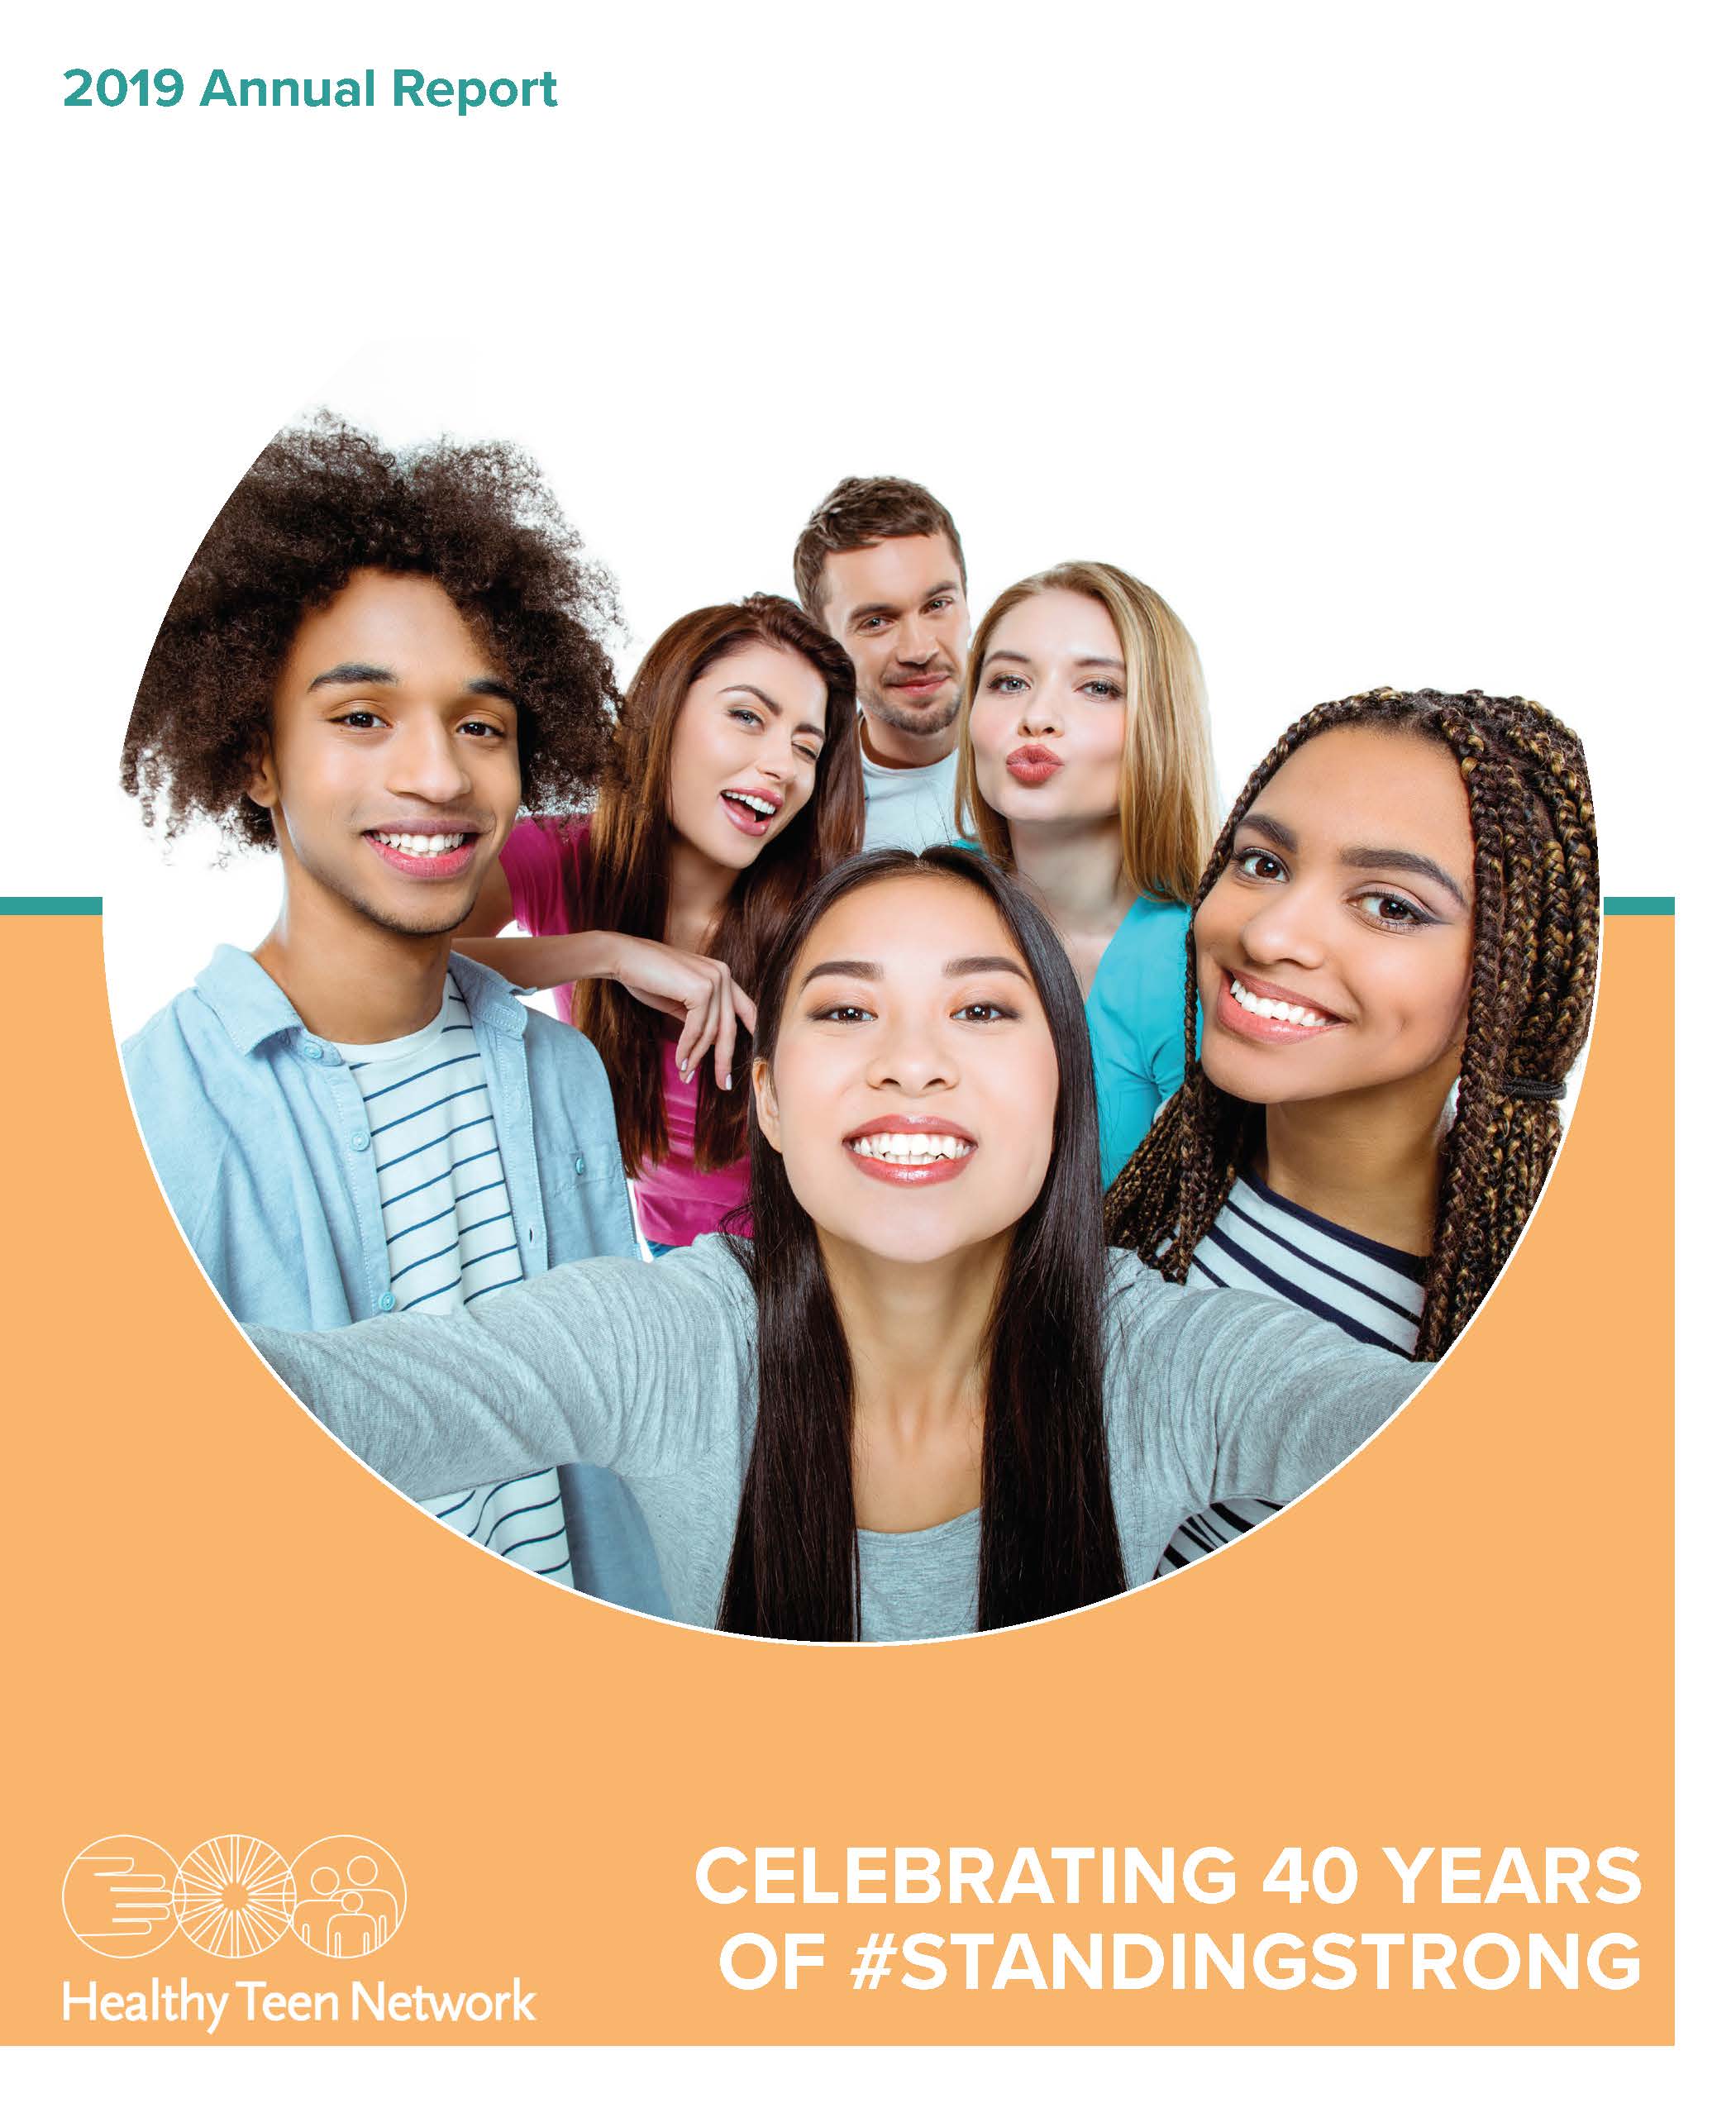 Cover image of 2019 annual report. Includes title and image of 6 adolescents, smiling for a group selfie.